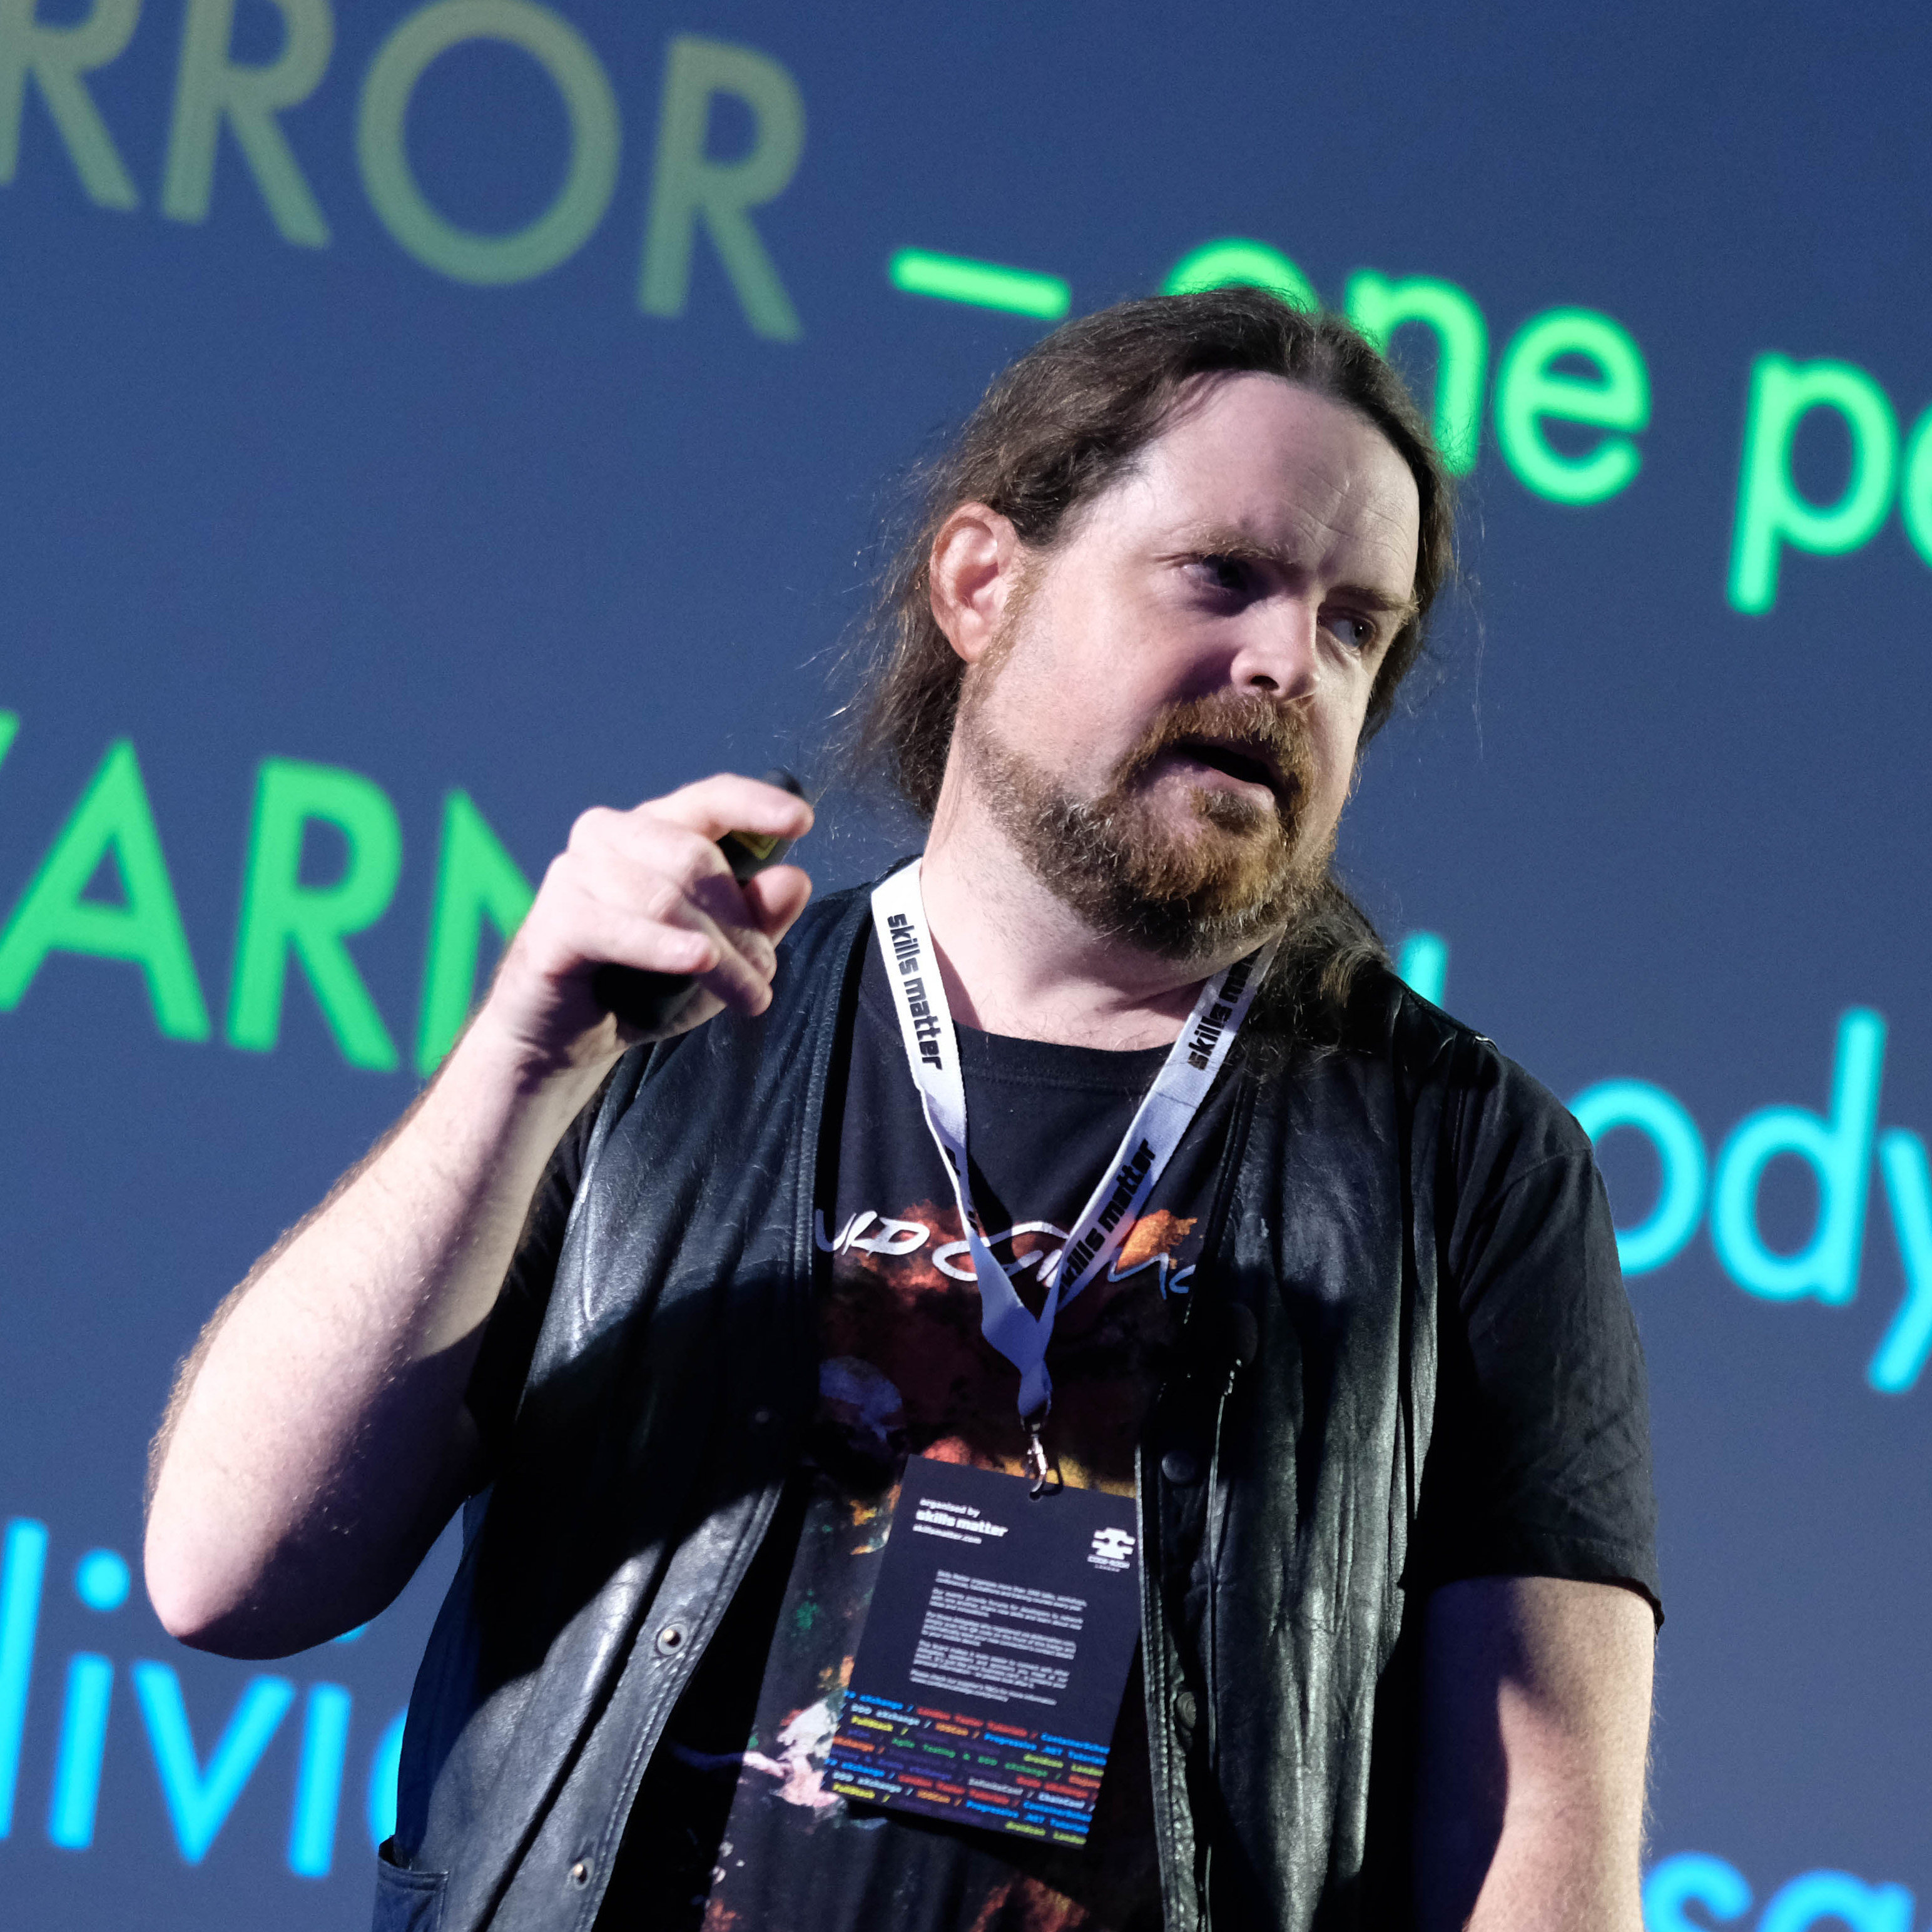 Photograph of Dylan Beattie speaking on stage at a technology conference